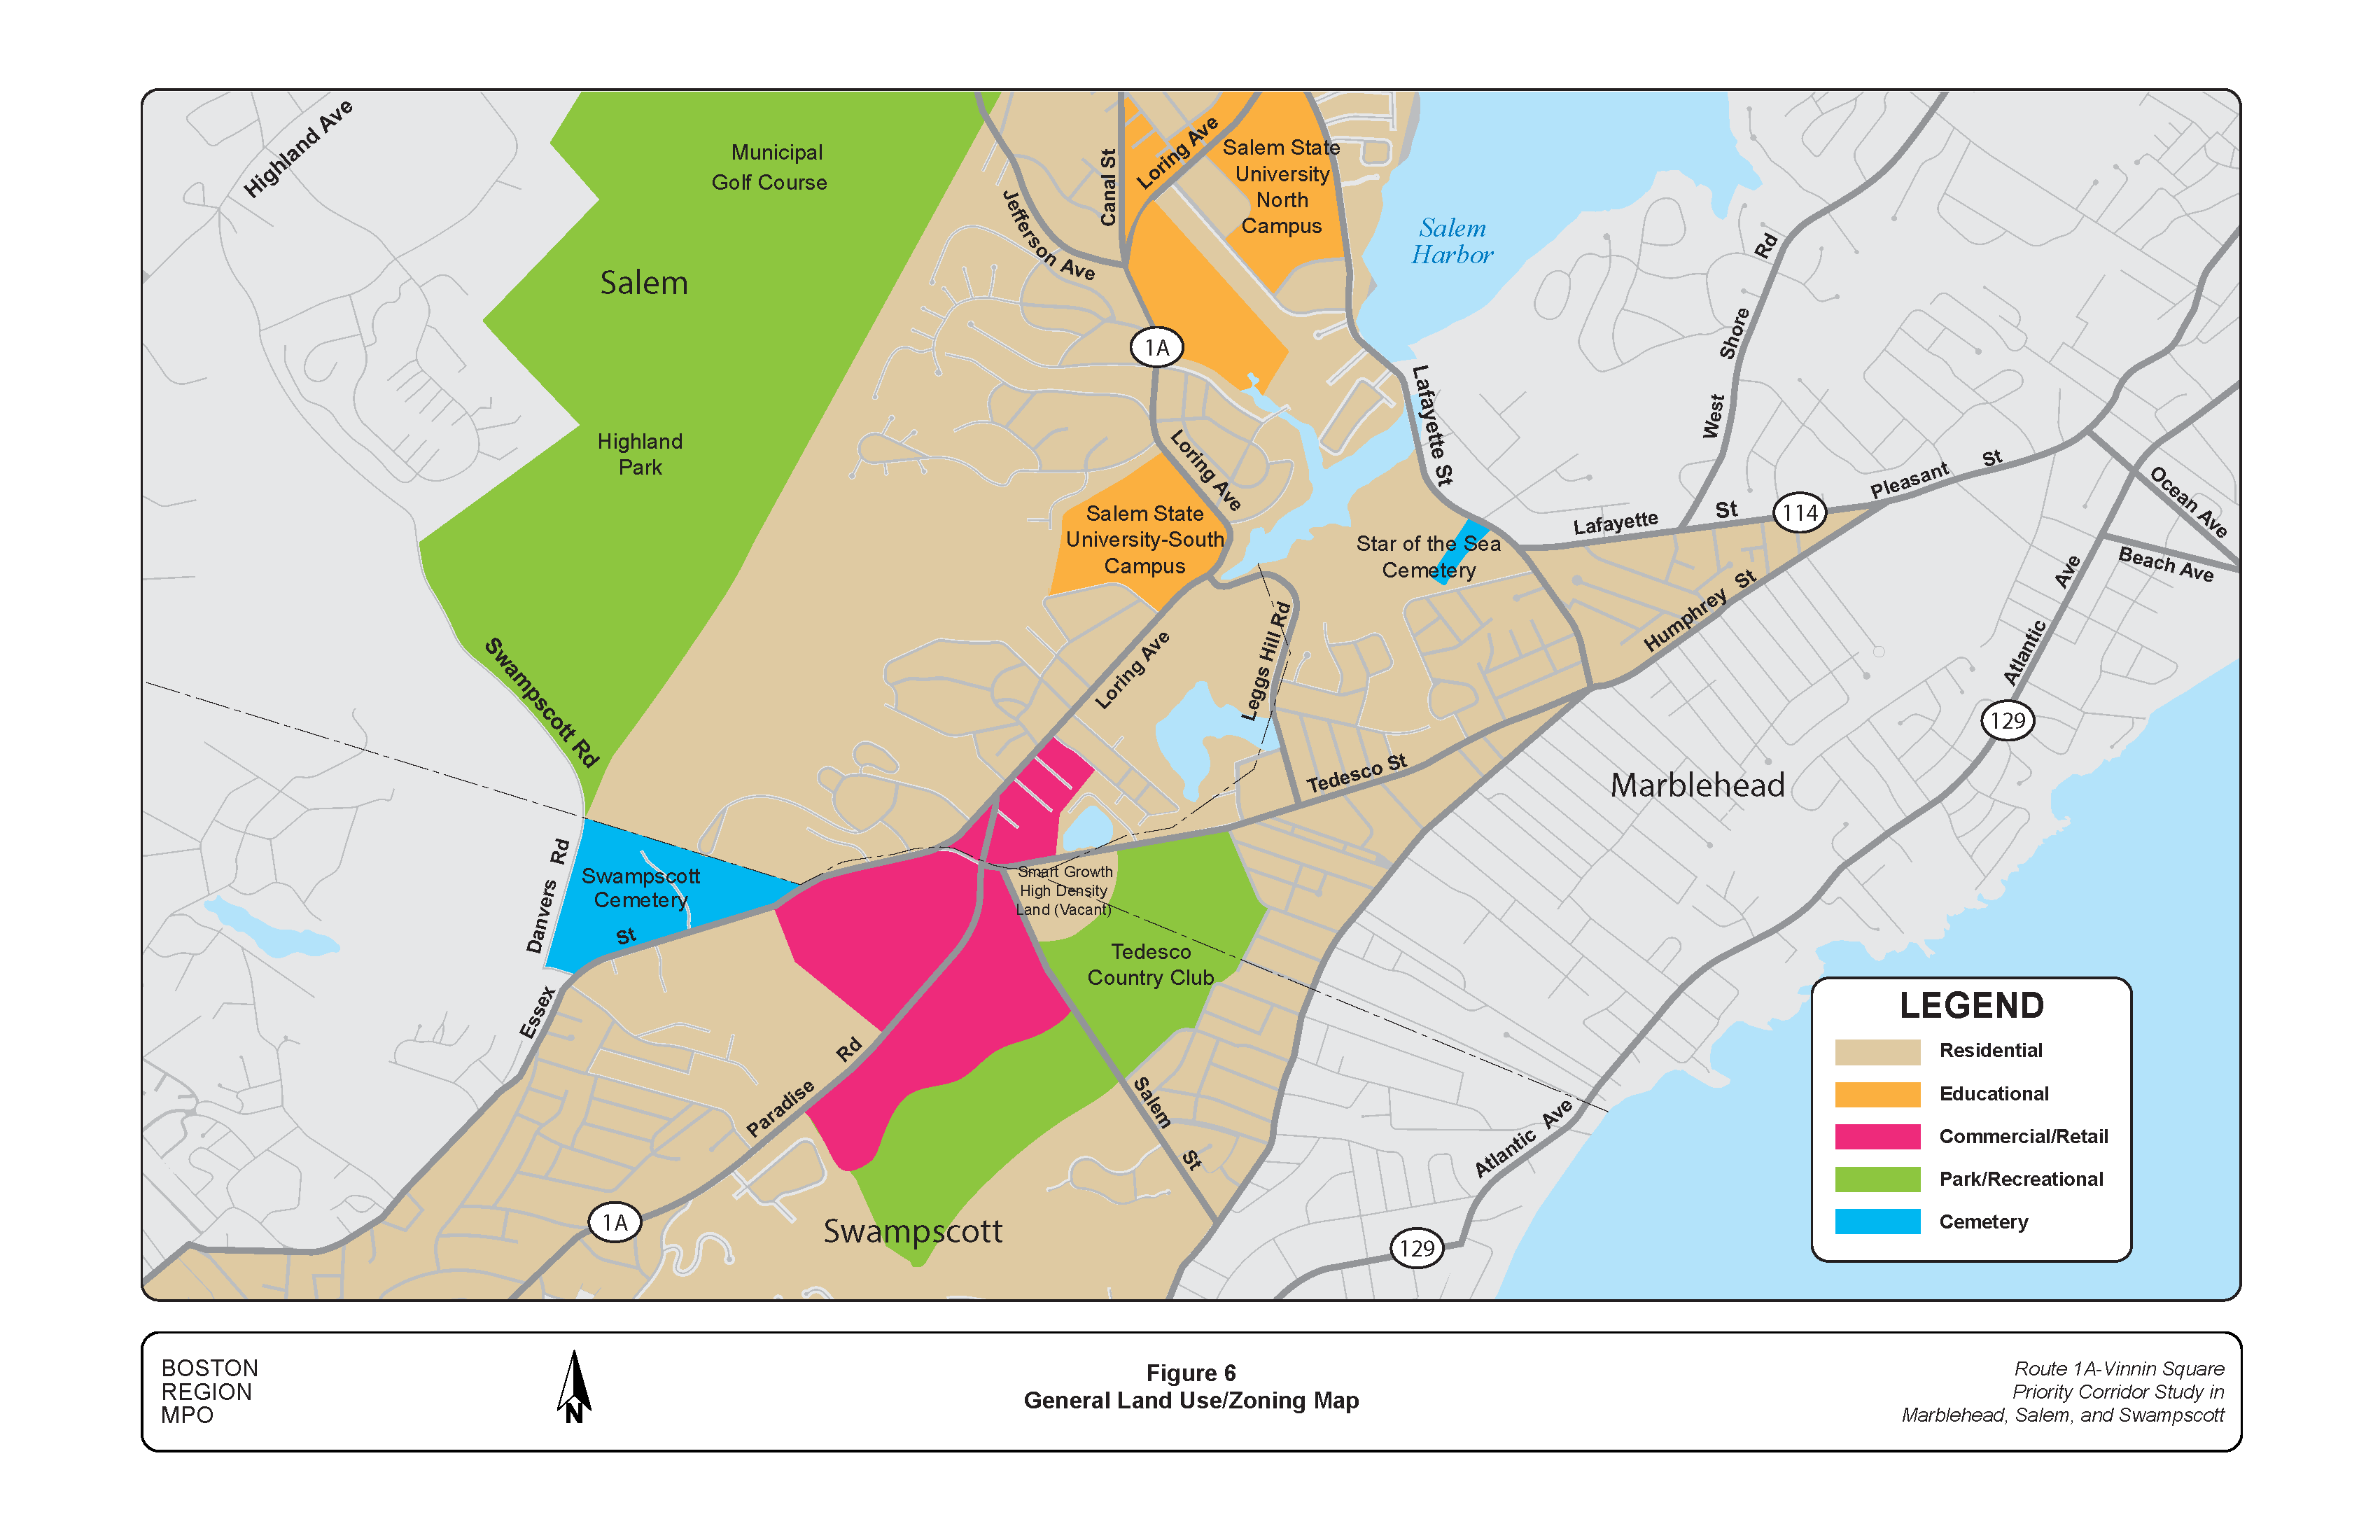 FIGURE 6. General Land Use/Zoning Map.Figure 6 is a map of the study area depicting land uses and zoning: residential, educational, commercial/retail, park/recreational, and cemetery.